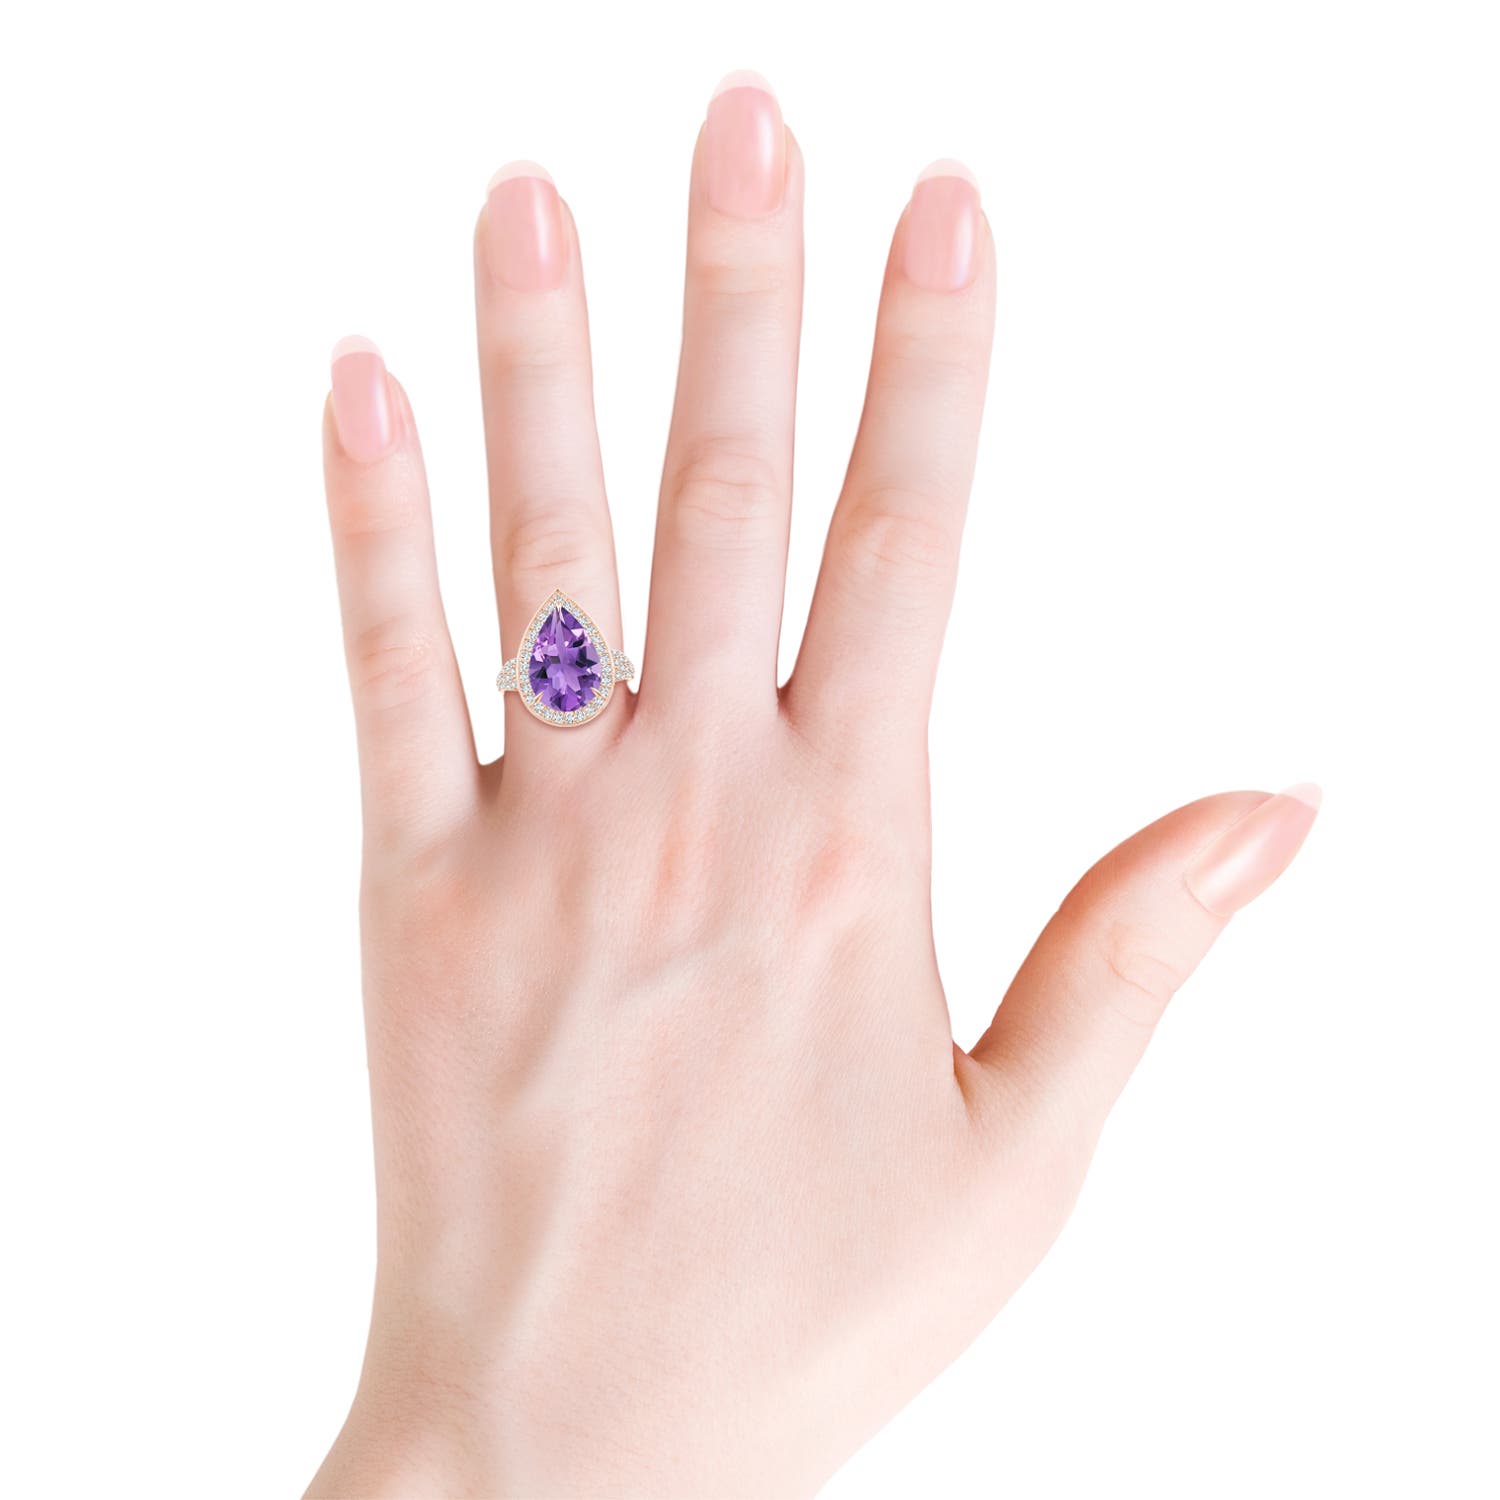 AA - Amethyst / 5.48 CT / 14 KT Rose Gold